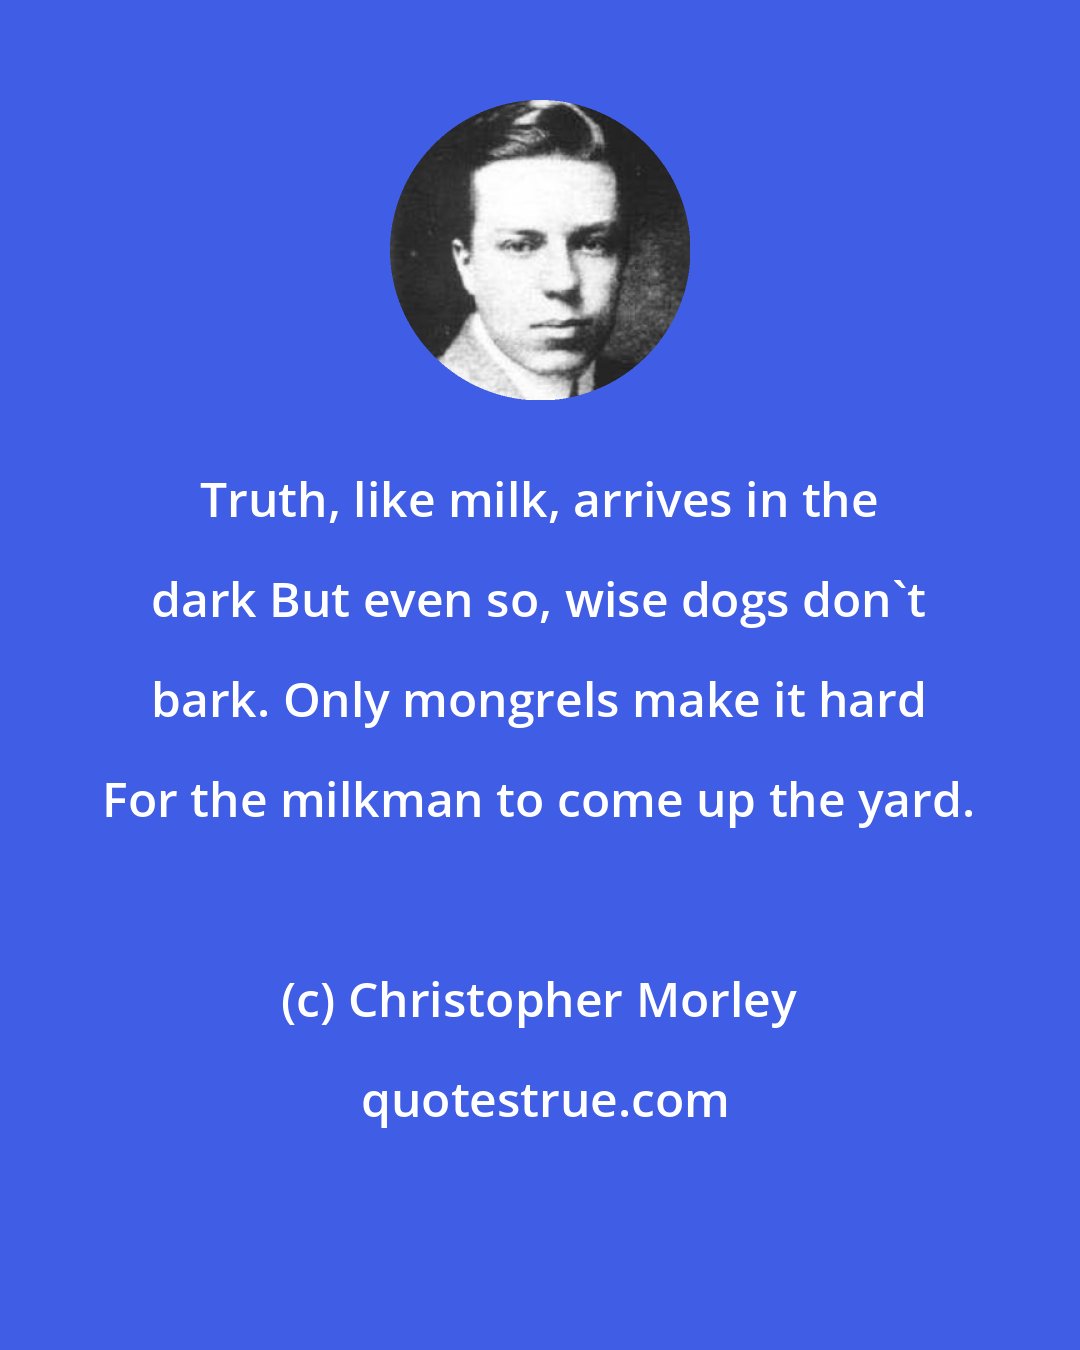 Christopher Morley: Truth, like milk, arrives in the dark But even so, wise dogs don't bark. Only mongrels make it hard For the milkman to come up the yard.